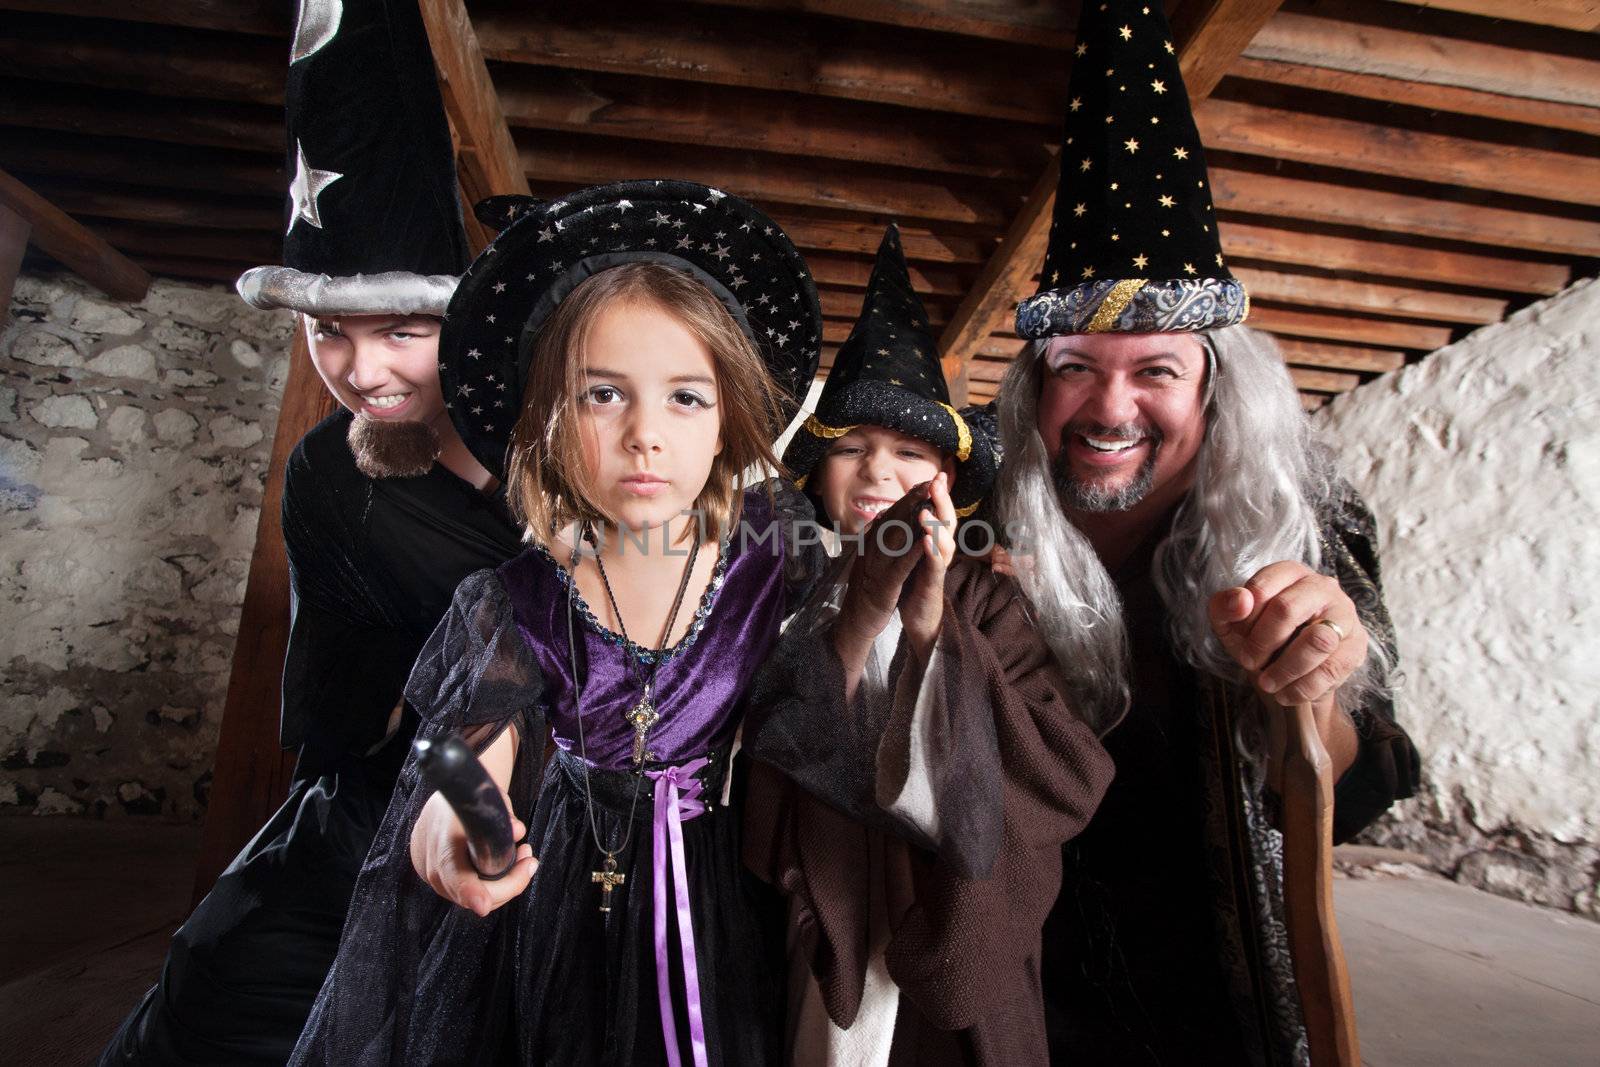 Magician father and children casting spells in a basement